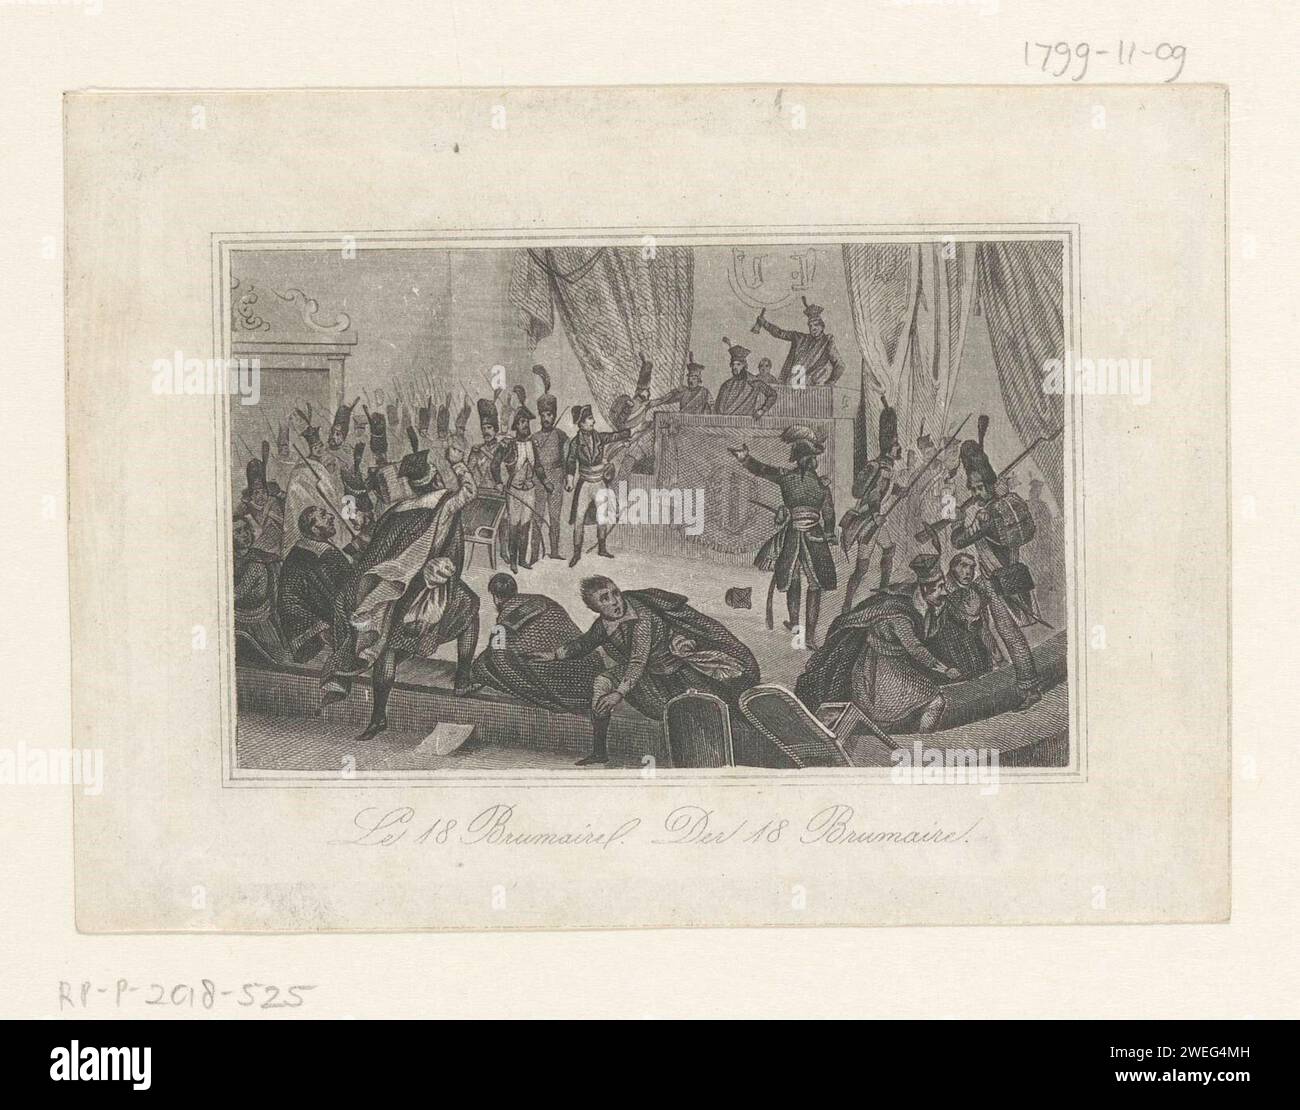 Coup of 18 Brumire, 1799, Anonymous, 1821 - 1899 print Coup of 18 Brumaire in which Napoleon seizes power in revolutionary France, November 9, 1799. Under the performance De Titels in French and German. Part of a group of twelve illustrations.  paper steel engraving proclamation of new government Paris Stock Photo